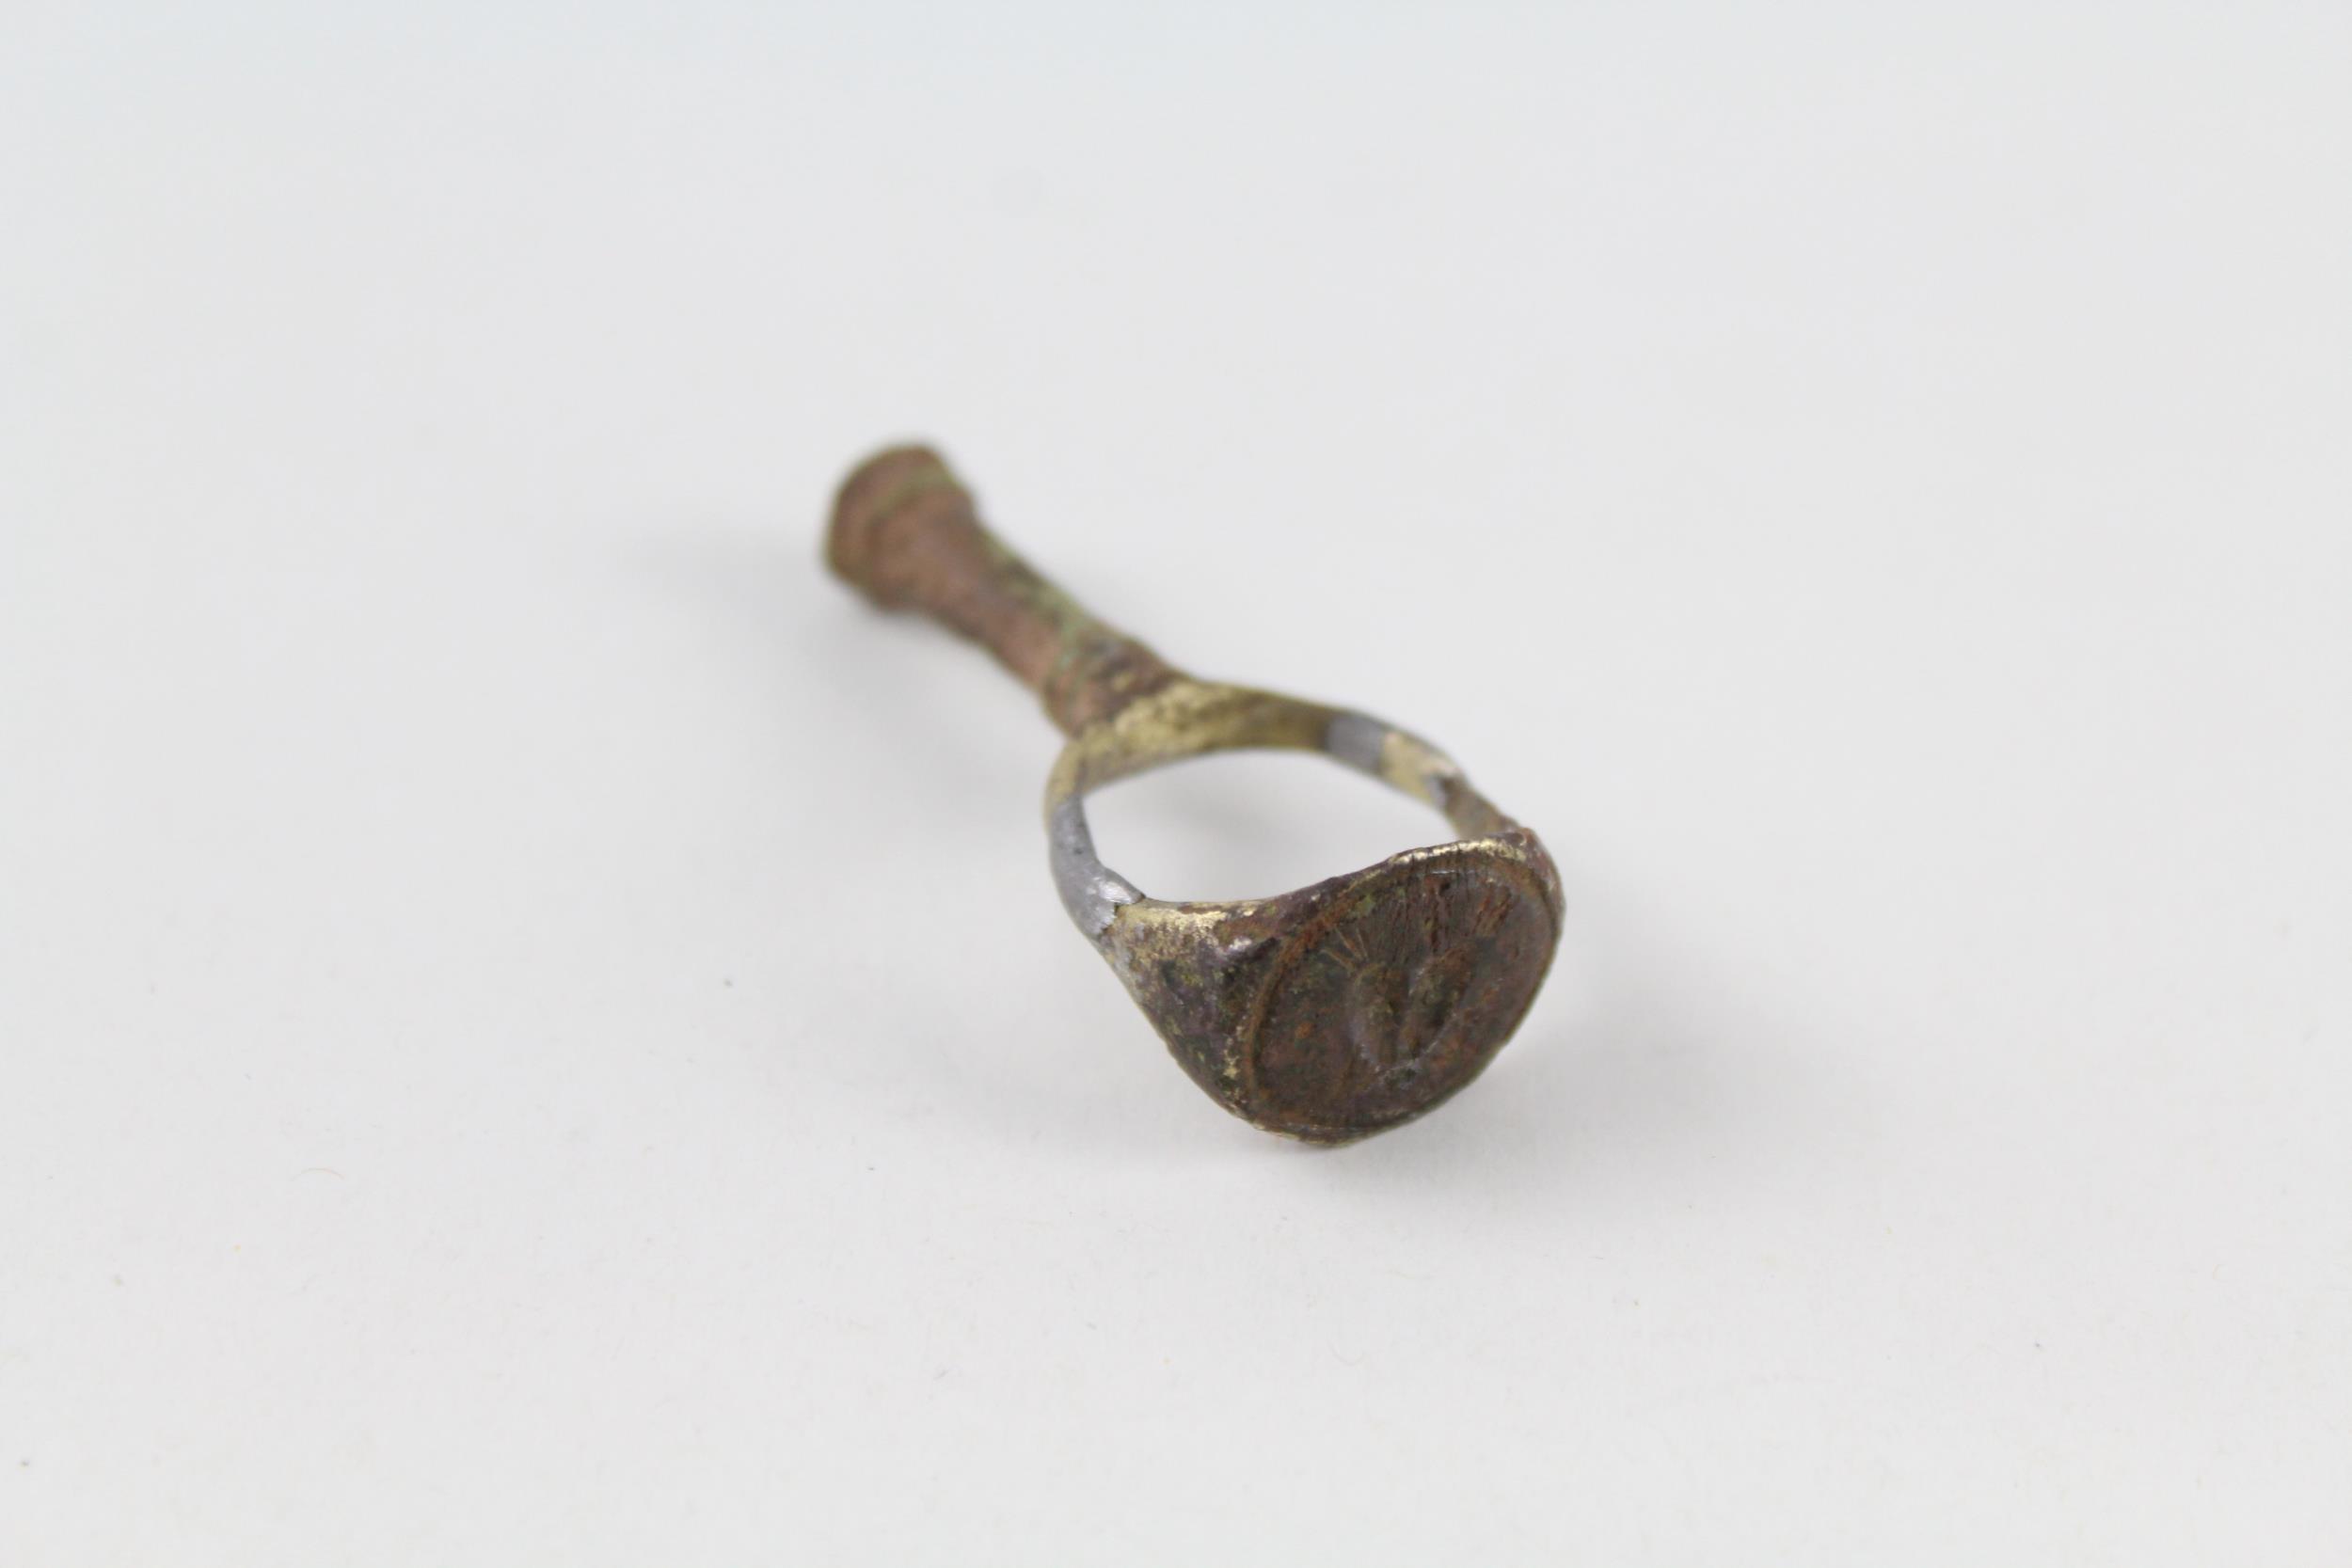 17th century ring/seal conversion possibly made to celebrate the marriage of Charles II to Catherine